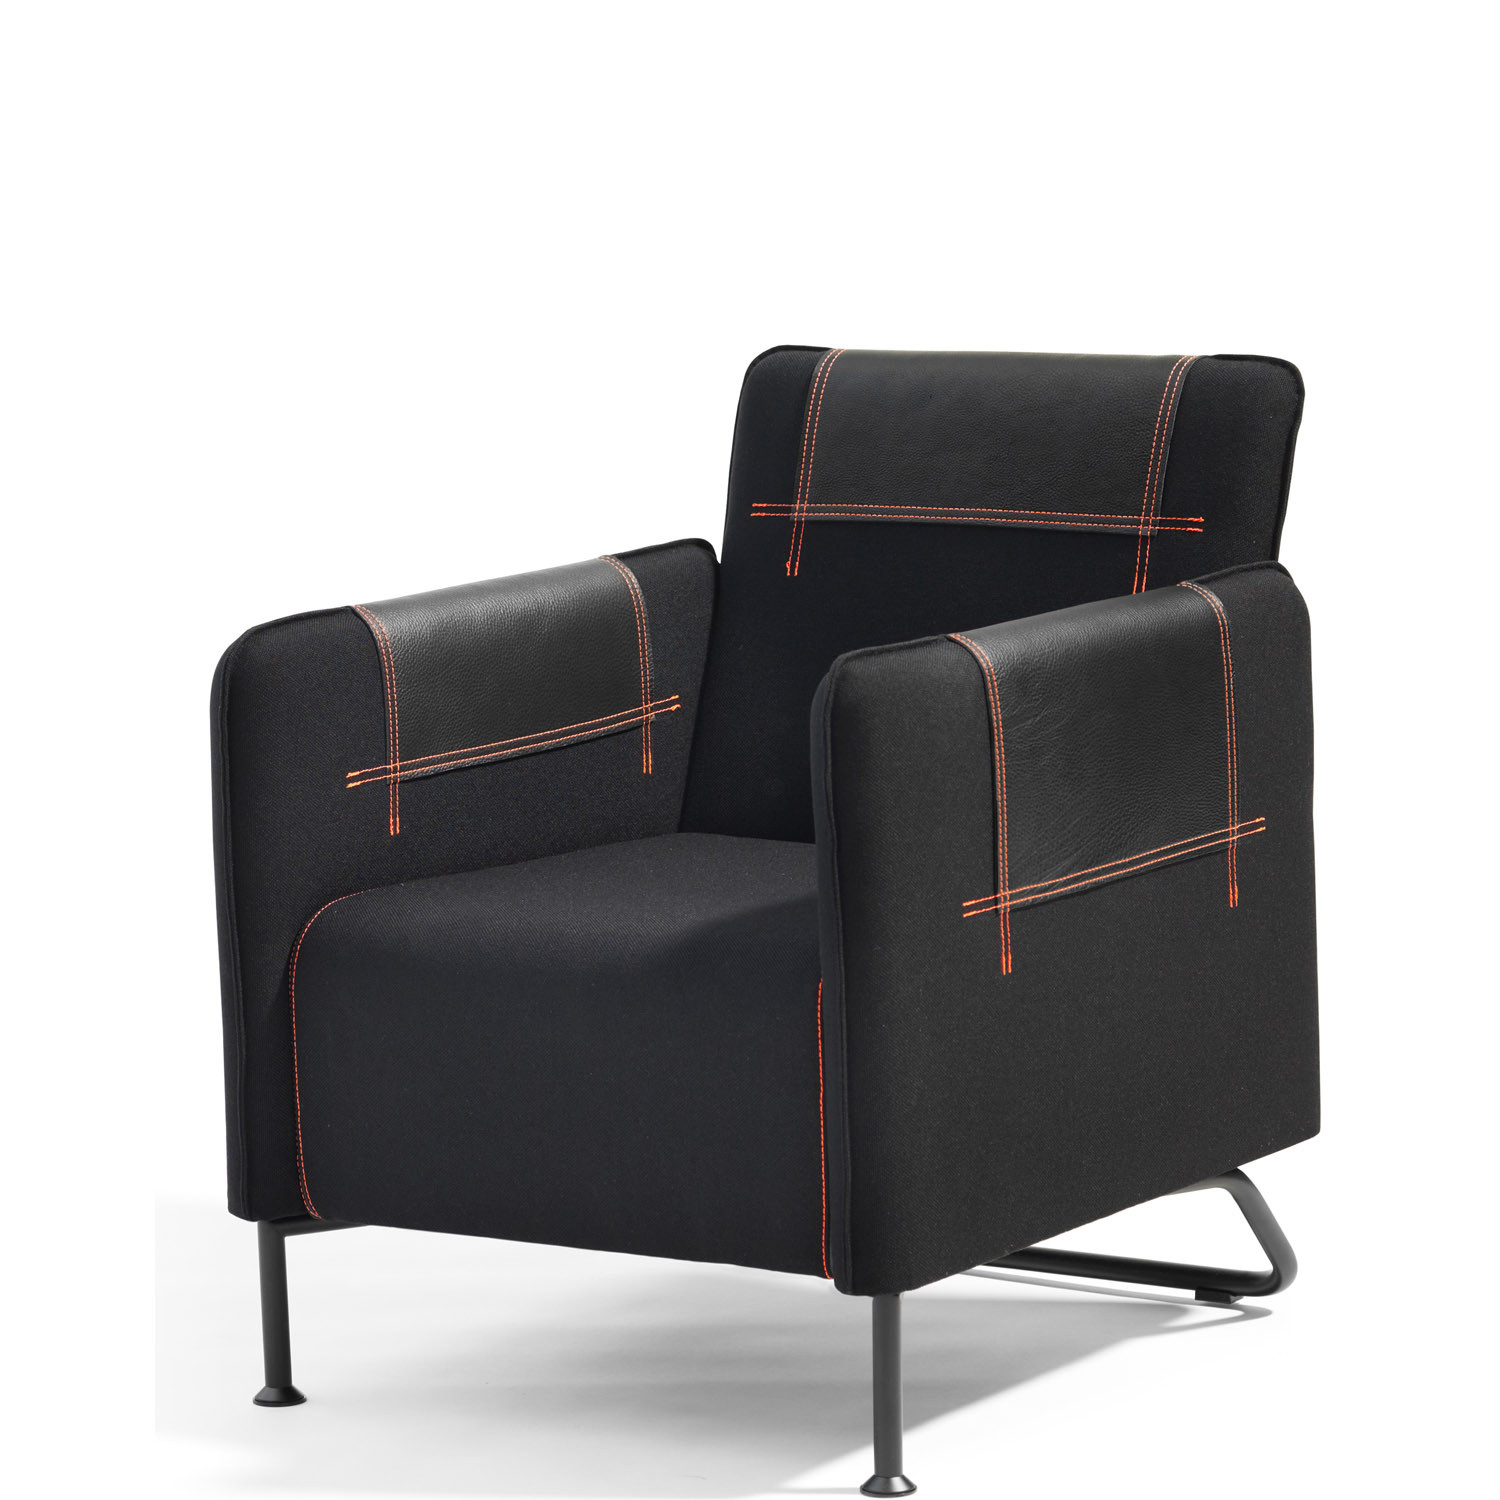 Taylor S36 Seating with contrast stitching